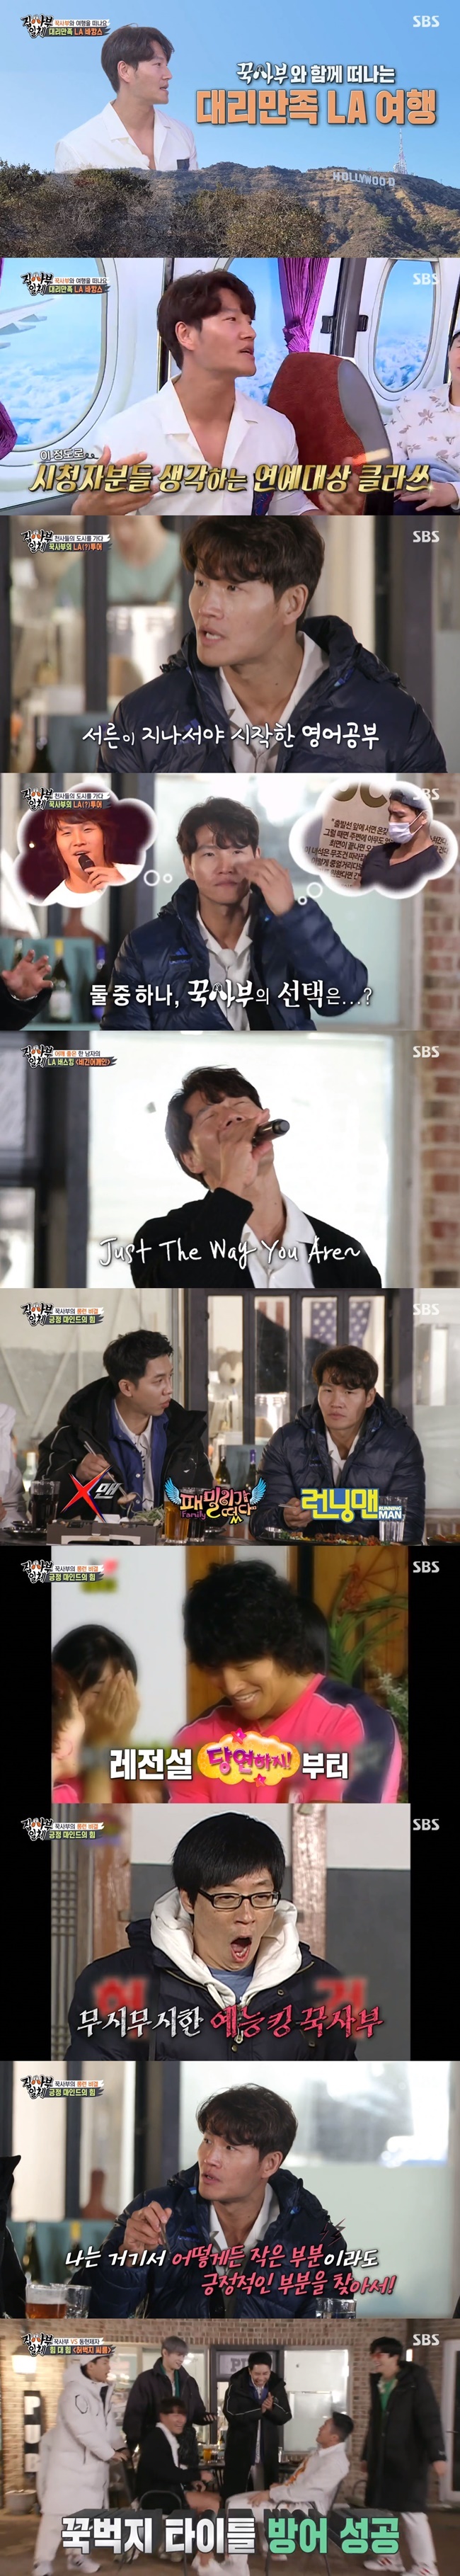 Kim Jong-kook reveals his own mental management methodOn SBS All The Butlers, which aired on April 18, a special vacation prepared by singer Kim Jong-kook for Disciples was unveiled.The Disciples left the vacation on a chartered plane prepared by the master, and the minibus, which was decorated like a real planes, boasted realism from the announcement to the scenery attached to the window frame.The members over-indulged their cell phones in Planes mode.The members then began to speculate on the masters identity. Yang Se-hyeong said, Yoo Jae-seoks staff greeted me.I knew that it was Running Man meeting. Shin Sung-rok said, Lee Sang-min and Tak Jae-hoon have appeared before.There are big names coming up, so will not the three people come?Among them, Master Kim Jong-kook, who was hiding in the front seat, appeared.Kim Jong-kook introduced the LA vacation for the Disciples and emphasized, We have to make it real so that viewers can feel it.Kim Jong-kook prepared an unexpected event for the Disciples in the LA immigration examination that arrived.Kim Dong-Hyun failed an unexpected mission to pay for tickets in 30 seconds and was knocked out in the wind.Yang Se-hyeong also received the same mission, but after paying all the money he had, he answered the rest is a tip.When the embarrassed immigration examiner asked, How do you travel if you do not have money? Yang Se-hyeong replied, There is a bit coin.Members who had completed the entry screening safely visited the outdoor pub on their first schedule; Kim Jong-kook said, I started studying full-scale English at the age of thirty.I was so uneasy to be humiliated or in a dangerous situation when I was traveling with my mother. Then, when Kim Jong-kook said that exercise was the main in the trip, Lee Seung-gi asked, So if you can do only one of the songs, exercises this year?Kim Jong-kook said, I am exercising after a long time, I can work out and plan an album.In addition, Kim Jong-kook showed off his constant singing ability by singing Bruno Mars song Just The Way You Are.My master has been doing entertainment on SBS Sunday for 18 years, Lee Seung-gi said.Kim Jong-kook has been in the position of SBS Sunday entertainment since X-Men to Family Out and Running Man.Kim Jong-kook responded, Its so grateful.Kim Jong-kook also said, If you try to do something well, you get unhappy.Rather, if you think you are losing money and concessioning, you will be happy even if you do not expect good things. The most important thing was to think about a very small positive part even if negative things happen.That was so helpful, he stressed.But Disciples pinched the part where Kim Jong-kook remained in the qualm after losing to Kim Dong-Hyun on Running Man five years ago.In a snap, the two mens revenge match resulted in a thigh wrestling match. Kim Jong-kook won two games and won lightly, revealing confidence that it is power to remain.Members who returned to the hostel rested, among which Kim Jong-kook stressed that when you come to the United States, you have to do a tear-up exercise before you shower at night.Kim Jong-kook started push-up training against the members.Kim Jong-kook shouted delicious with a push-up and the Disciples screamed I want to stop eating.